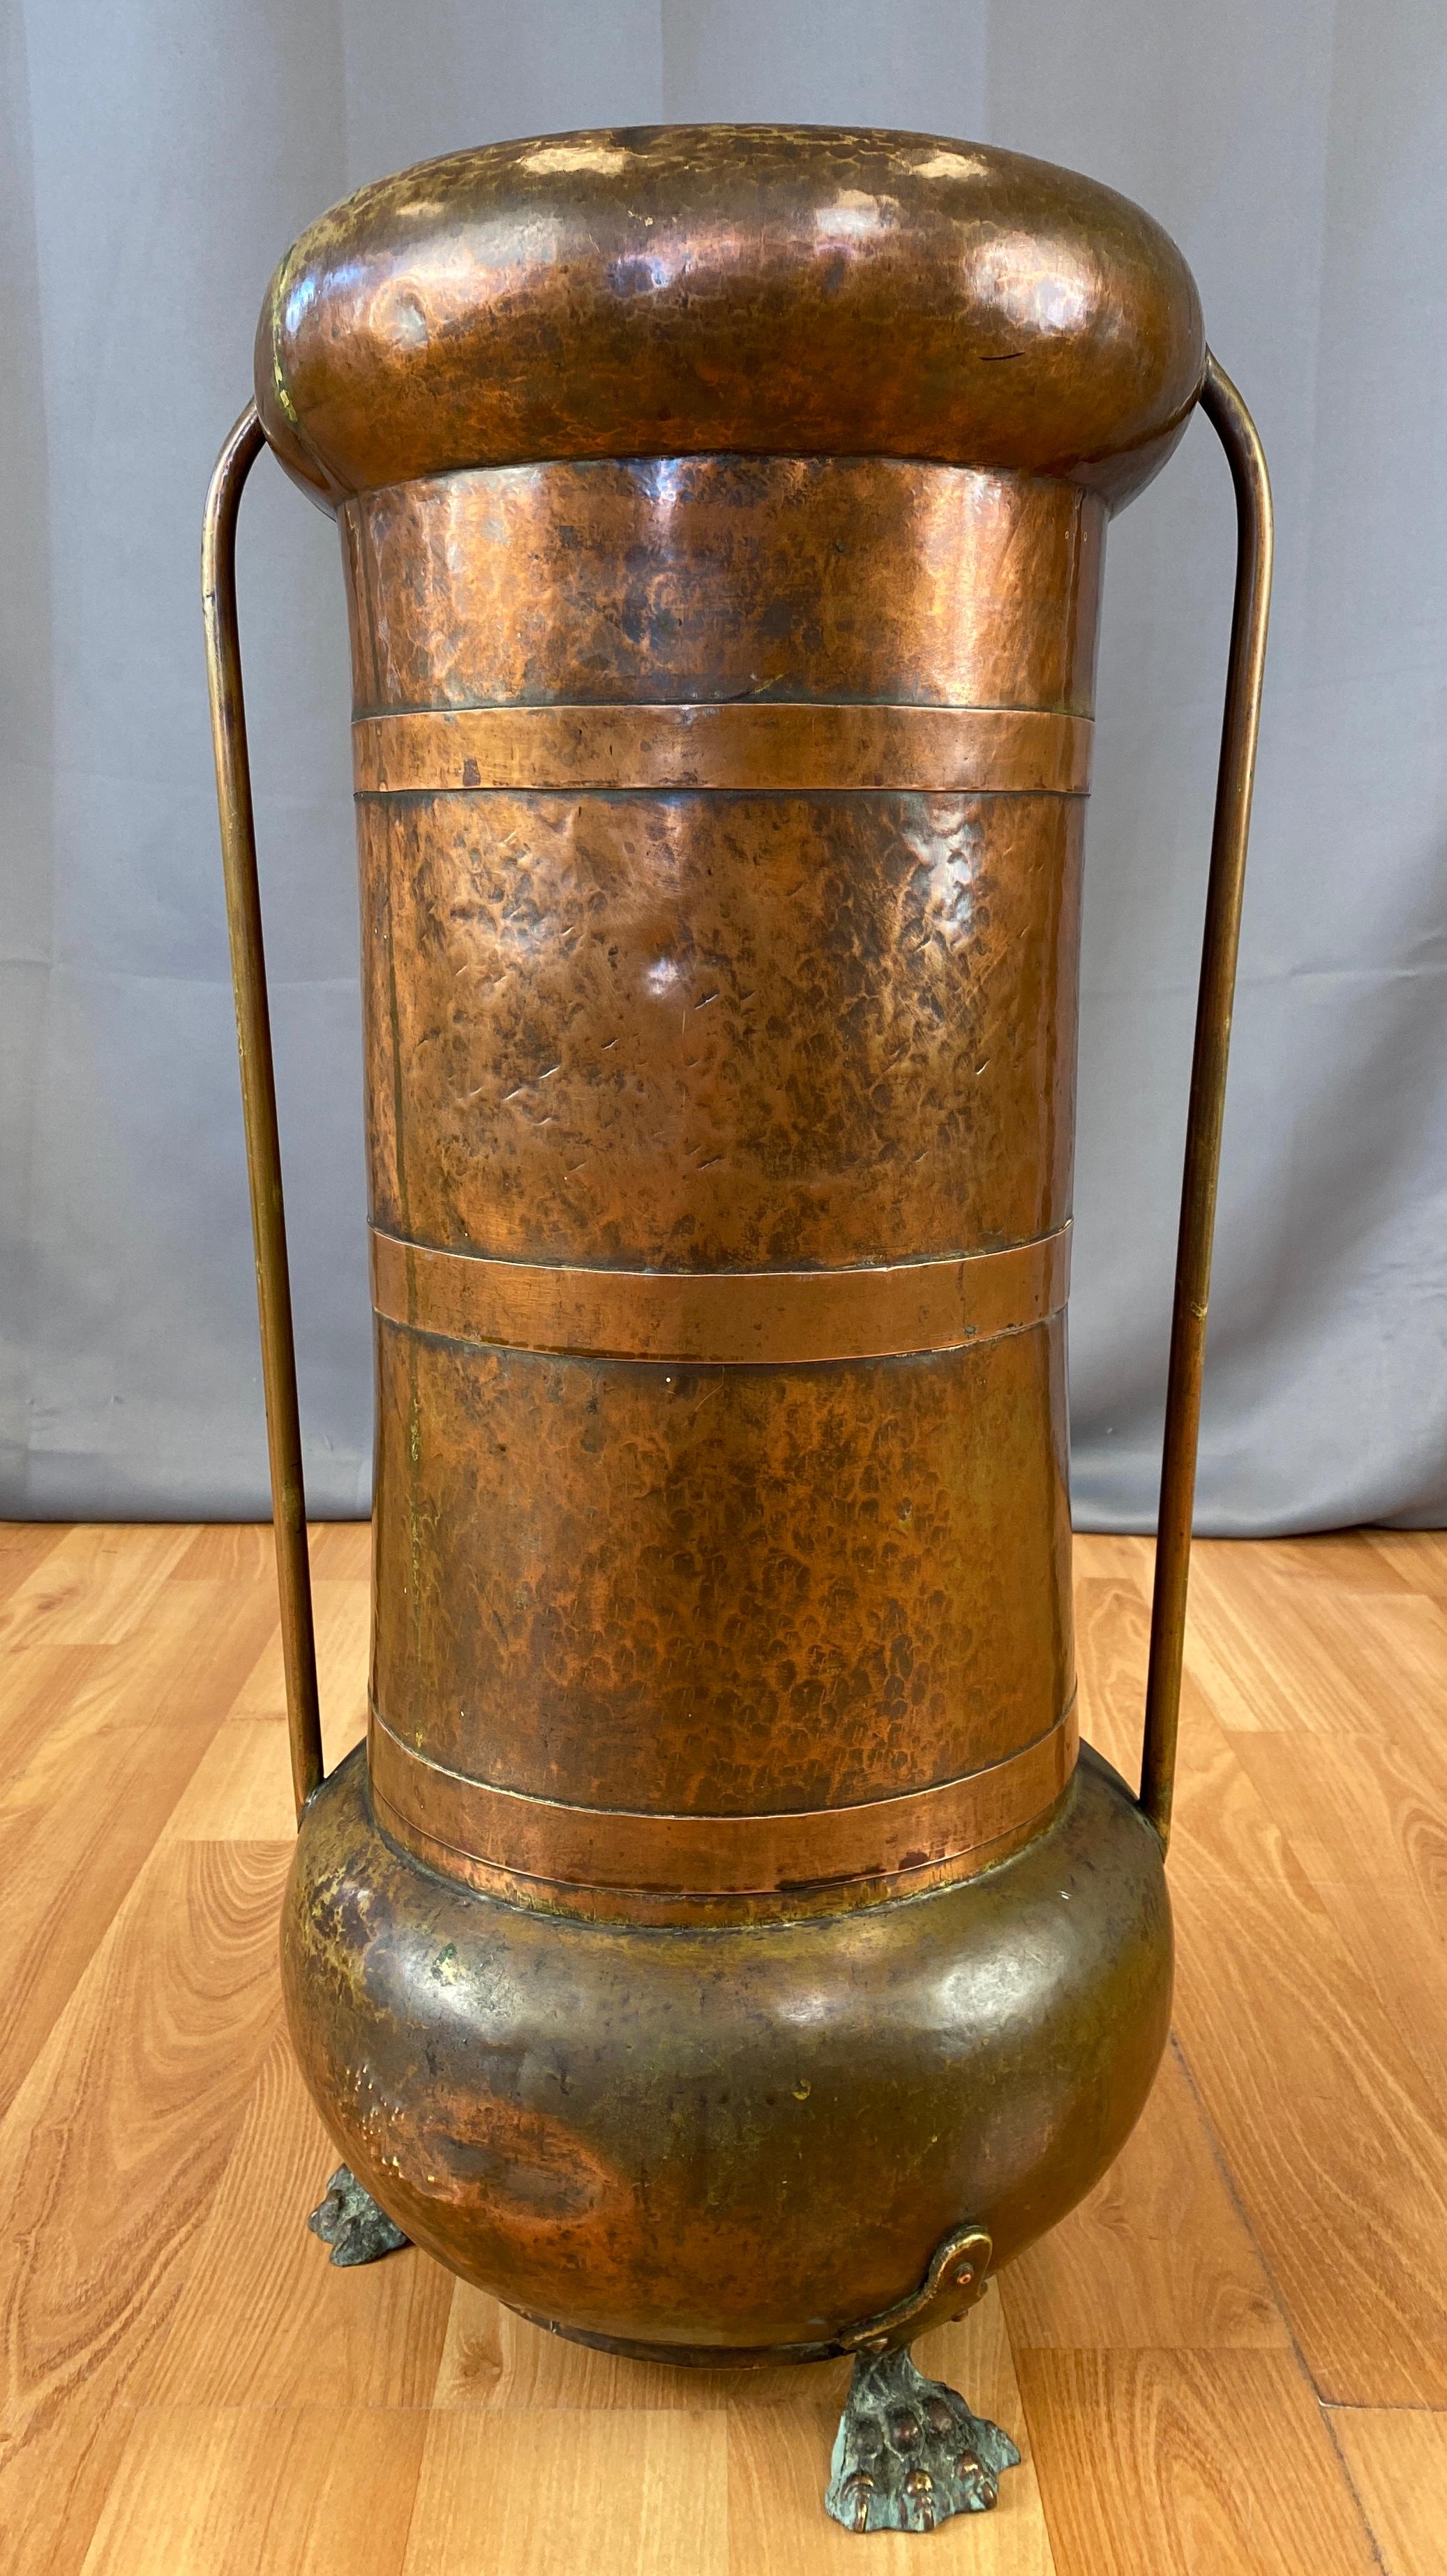 20th Century Arts & Crafts Style Russian Hammered Copper Umbrella or Cane Stand